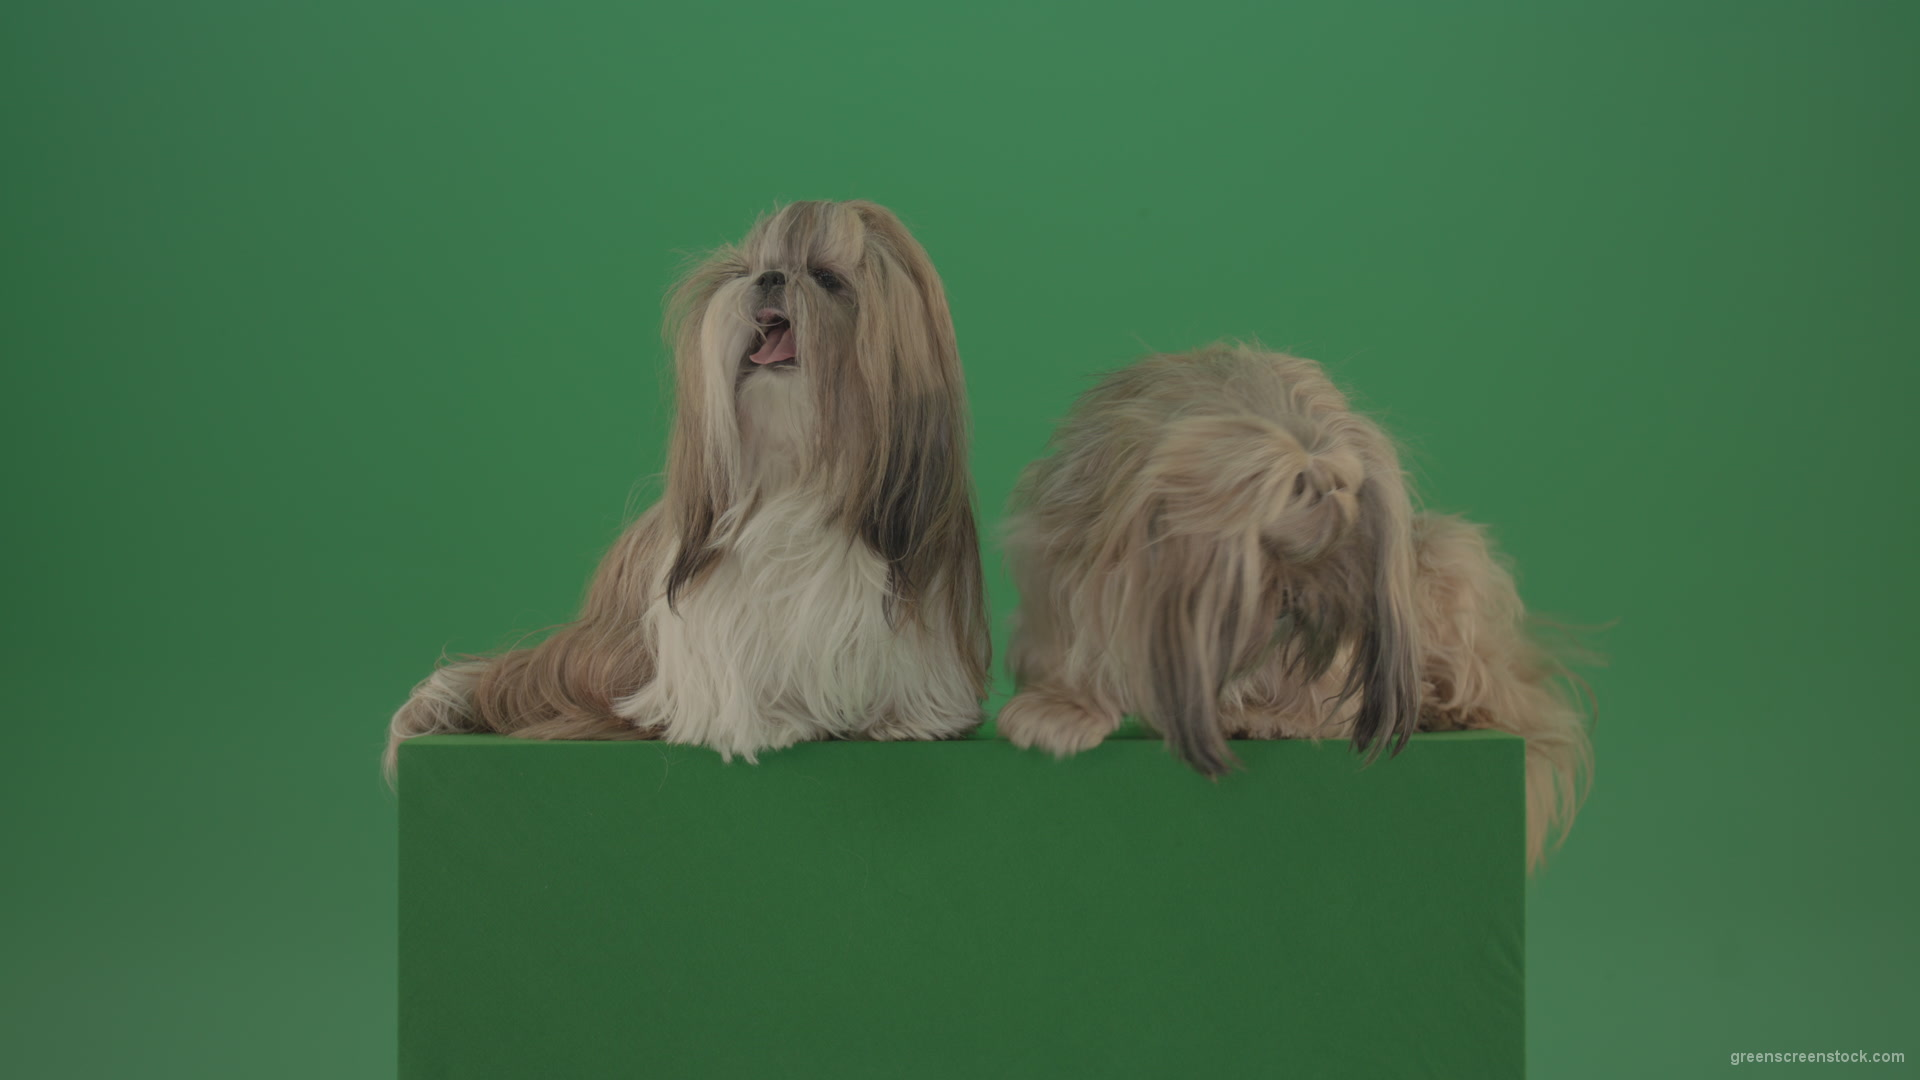 Award-winning-Small-toy-Shihtzu-Dogs-isolated-on-green-screen_002 Green Screen Stock